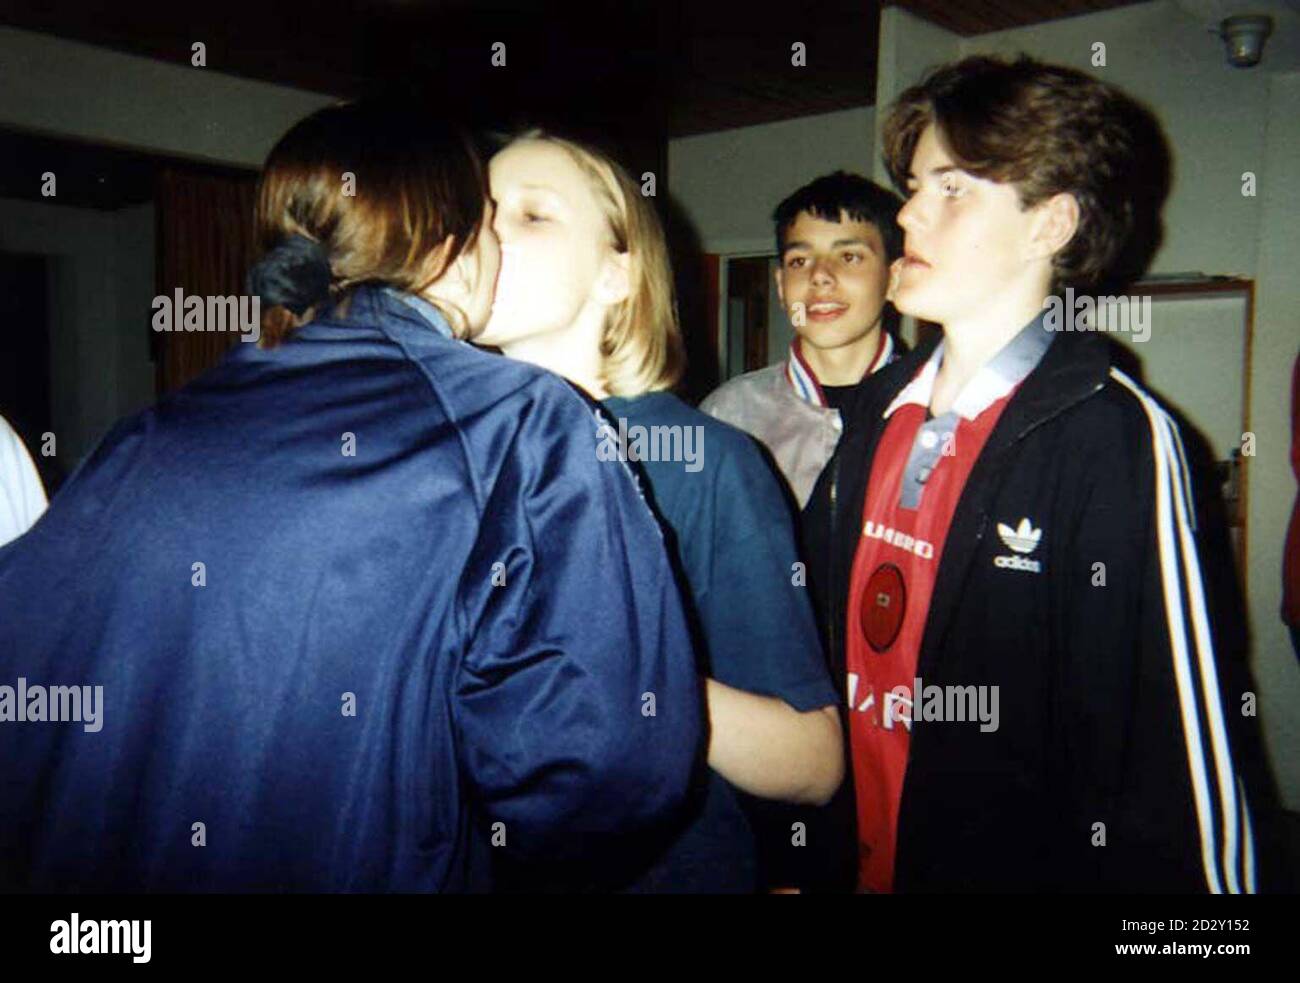 One of the last pictures taken of the tragic pupils from St James's School, Farnworth, who died in a coach crash in the French Alps last week. (L-R) Laura England (who survived), Nicola Moore, Keith Ridding and Robert Boardman. The girls are taking part in a party game involving passing a playing card using your teeth, whilst the boys look on on the first night of their school trip. Robert and Keith will be buried side by side today (Thursday) at a Manchester Church, whilst Nicola's funeral is expected to take place on Friday. PA. SEE PA STORY FUNERAL Alps. Stock Photo